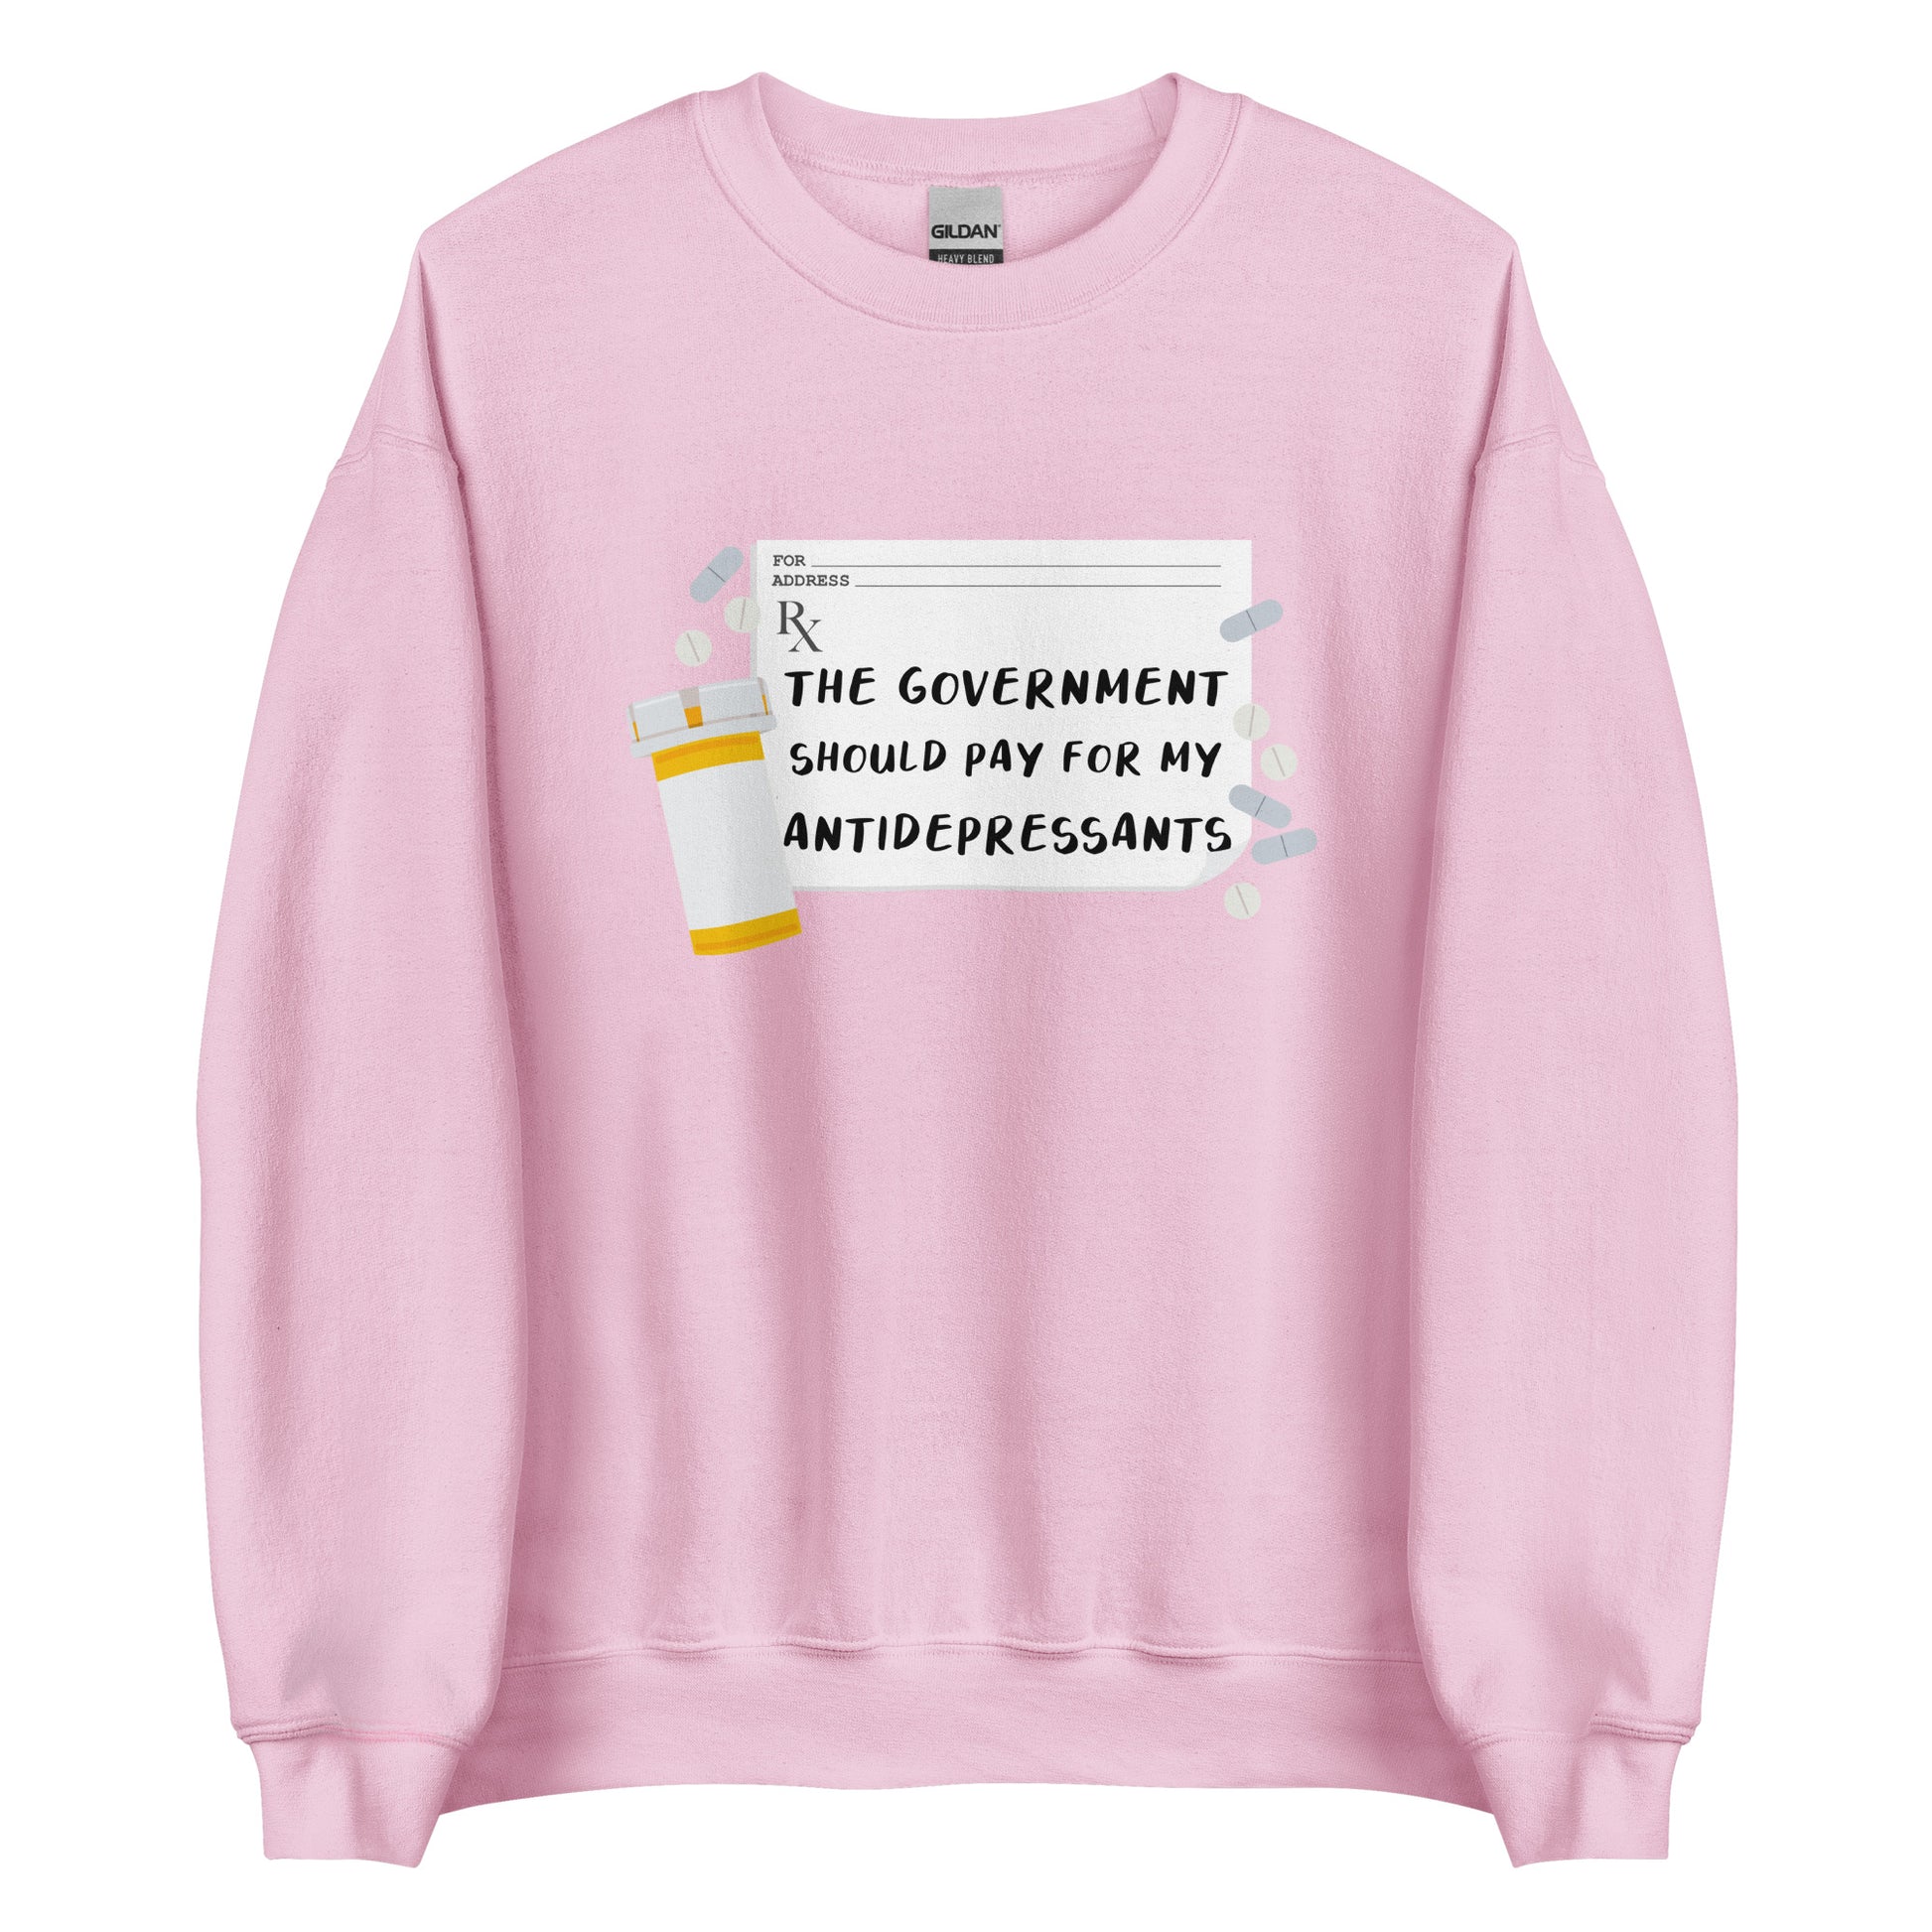 A pink crewneck sweatshirt featuring an image of a subscription page with text that reads "The government should pay for my antidepressants". Pills and an empty orange pill bottle surround the RX sheet.